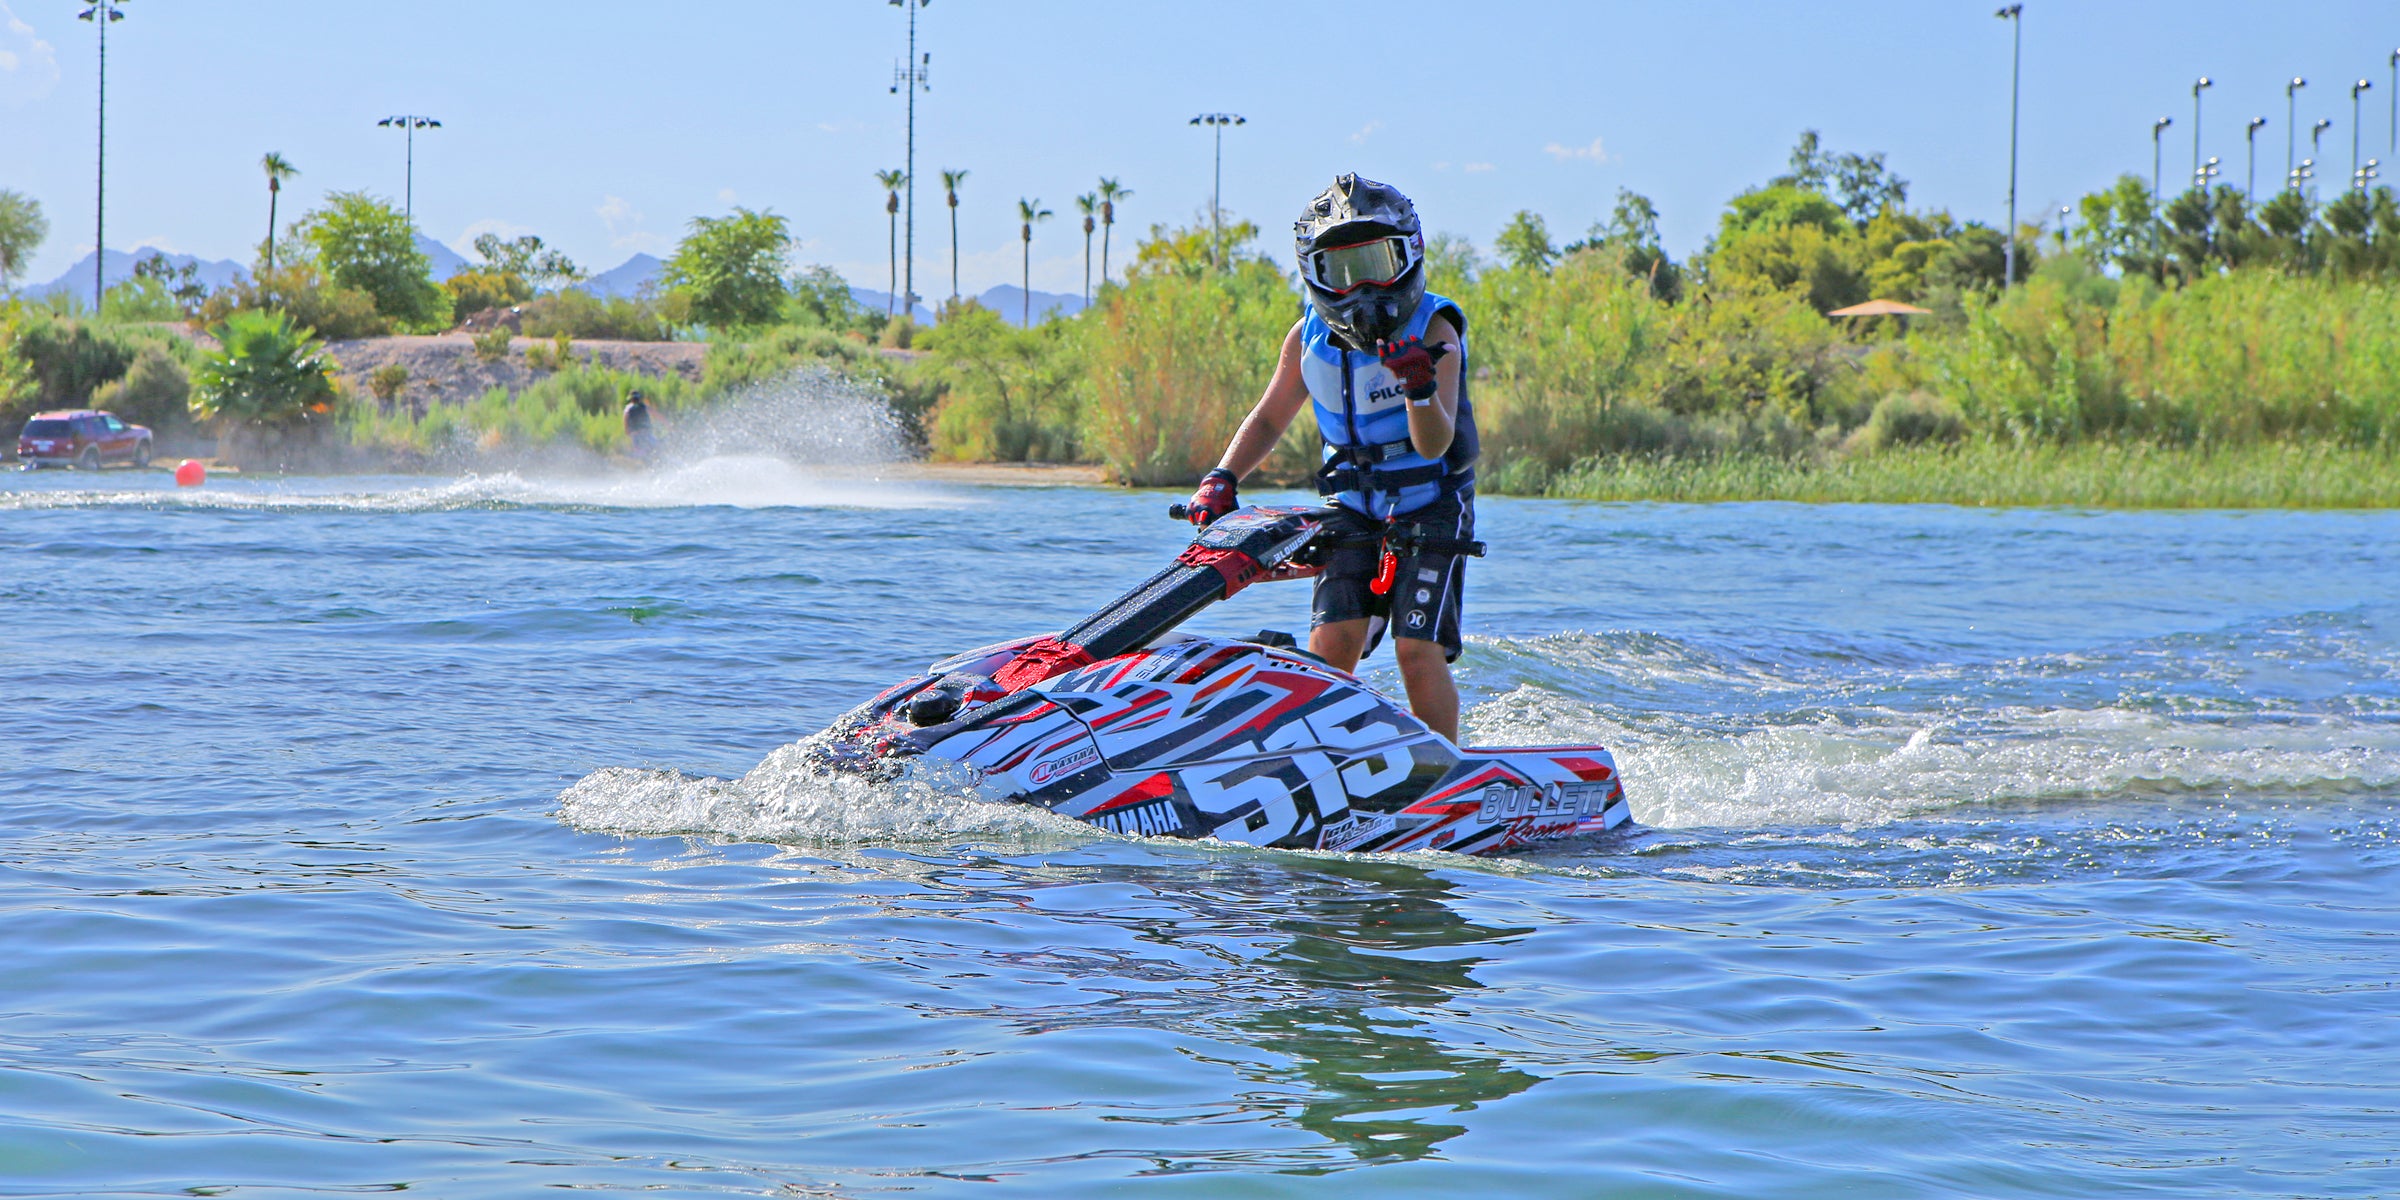 A young rider on the jet ski wearing our Youth Vintage Class Neoprene CGA Vest in the color Blue/White.